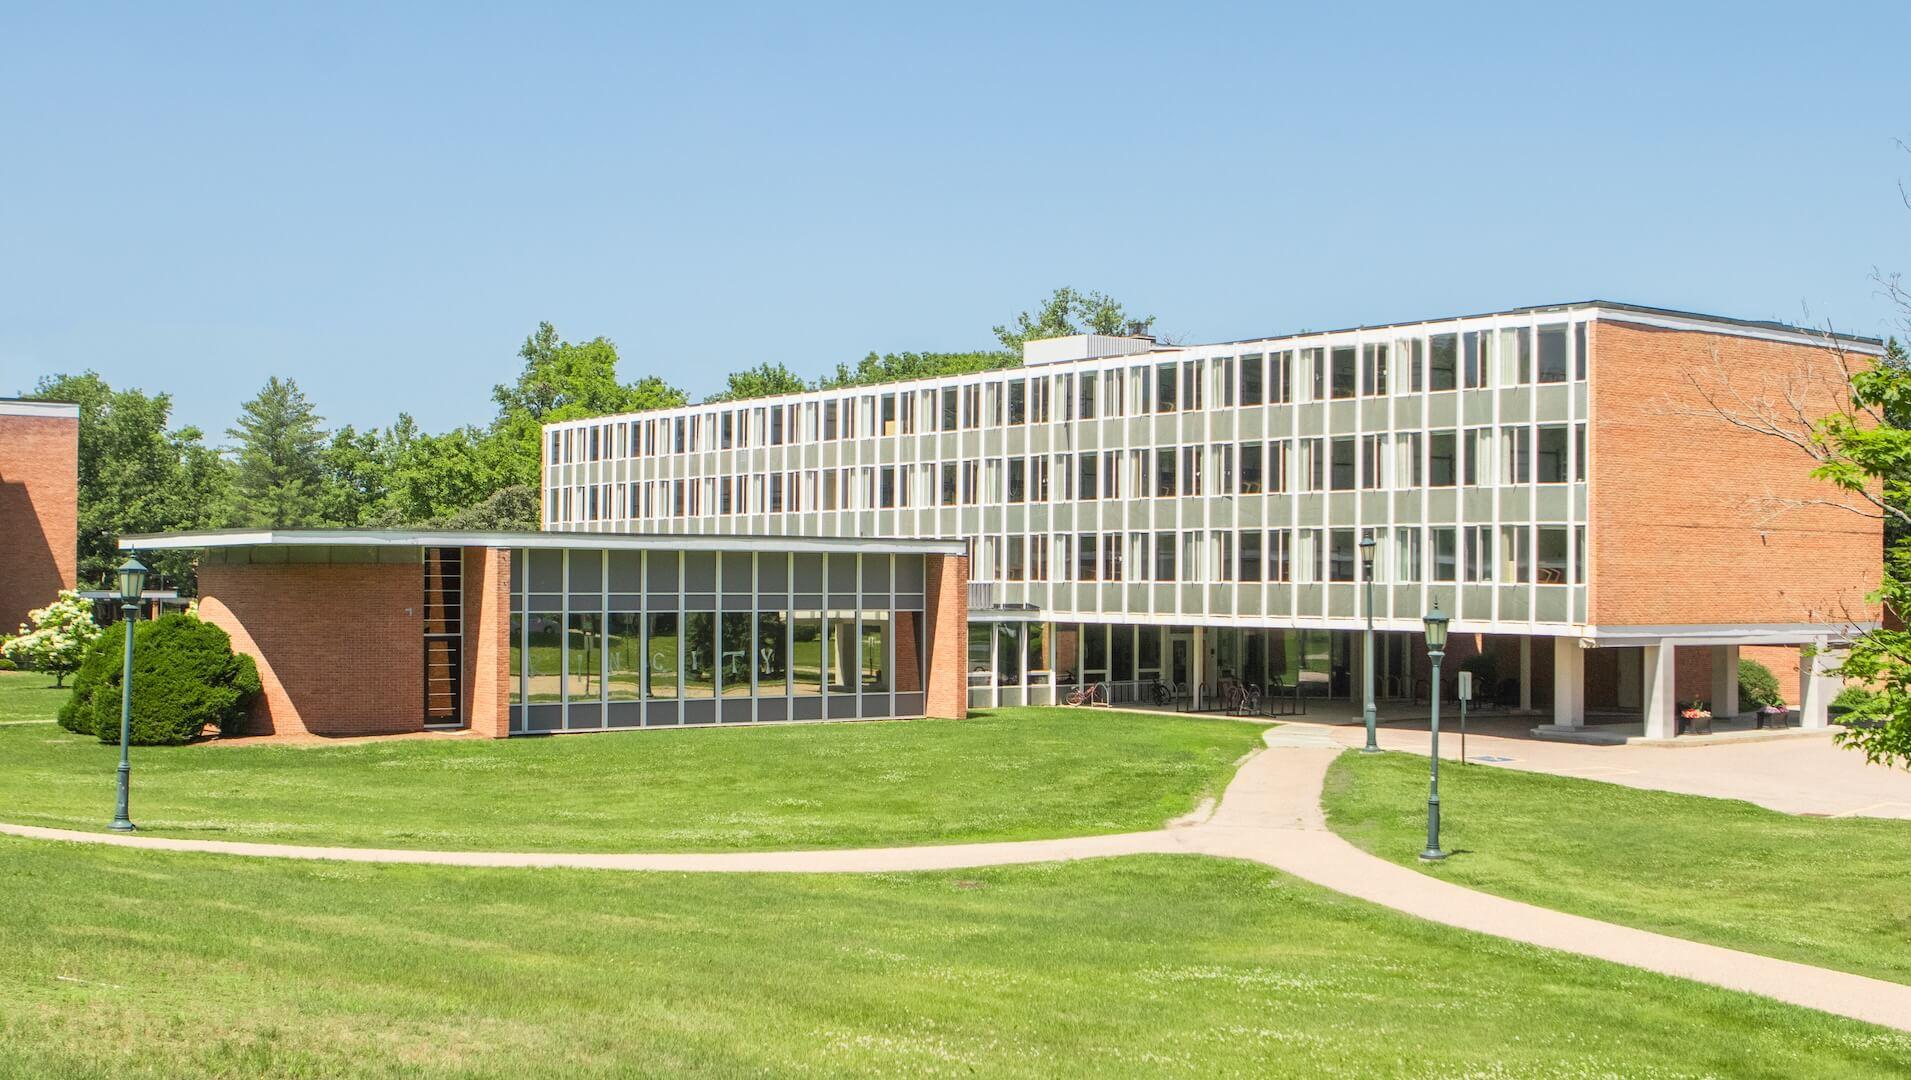 A four-story brick residence hall with a large wall of windows next to a grassy area. 